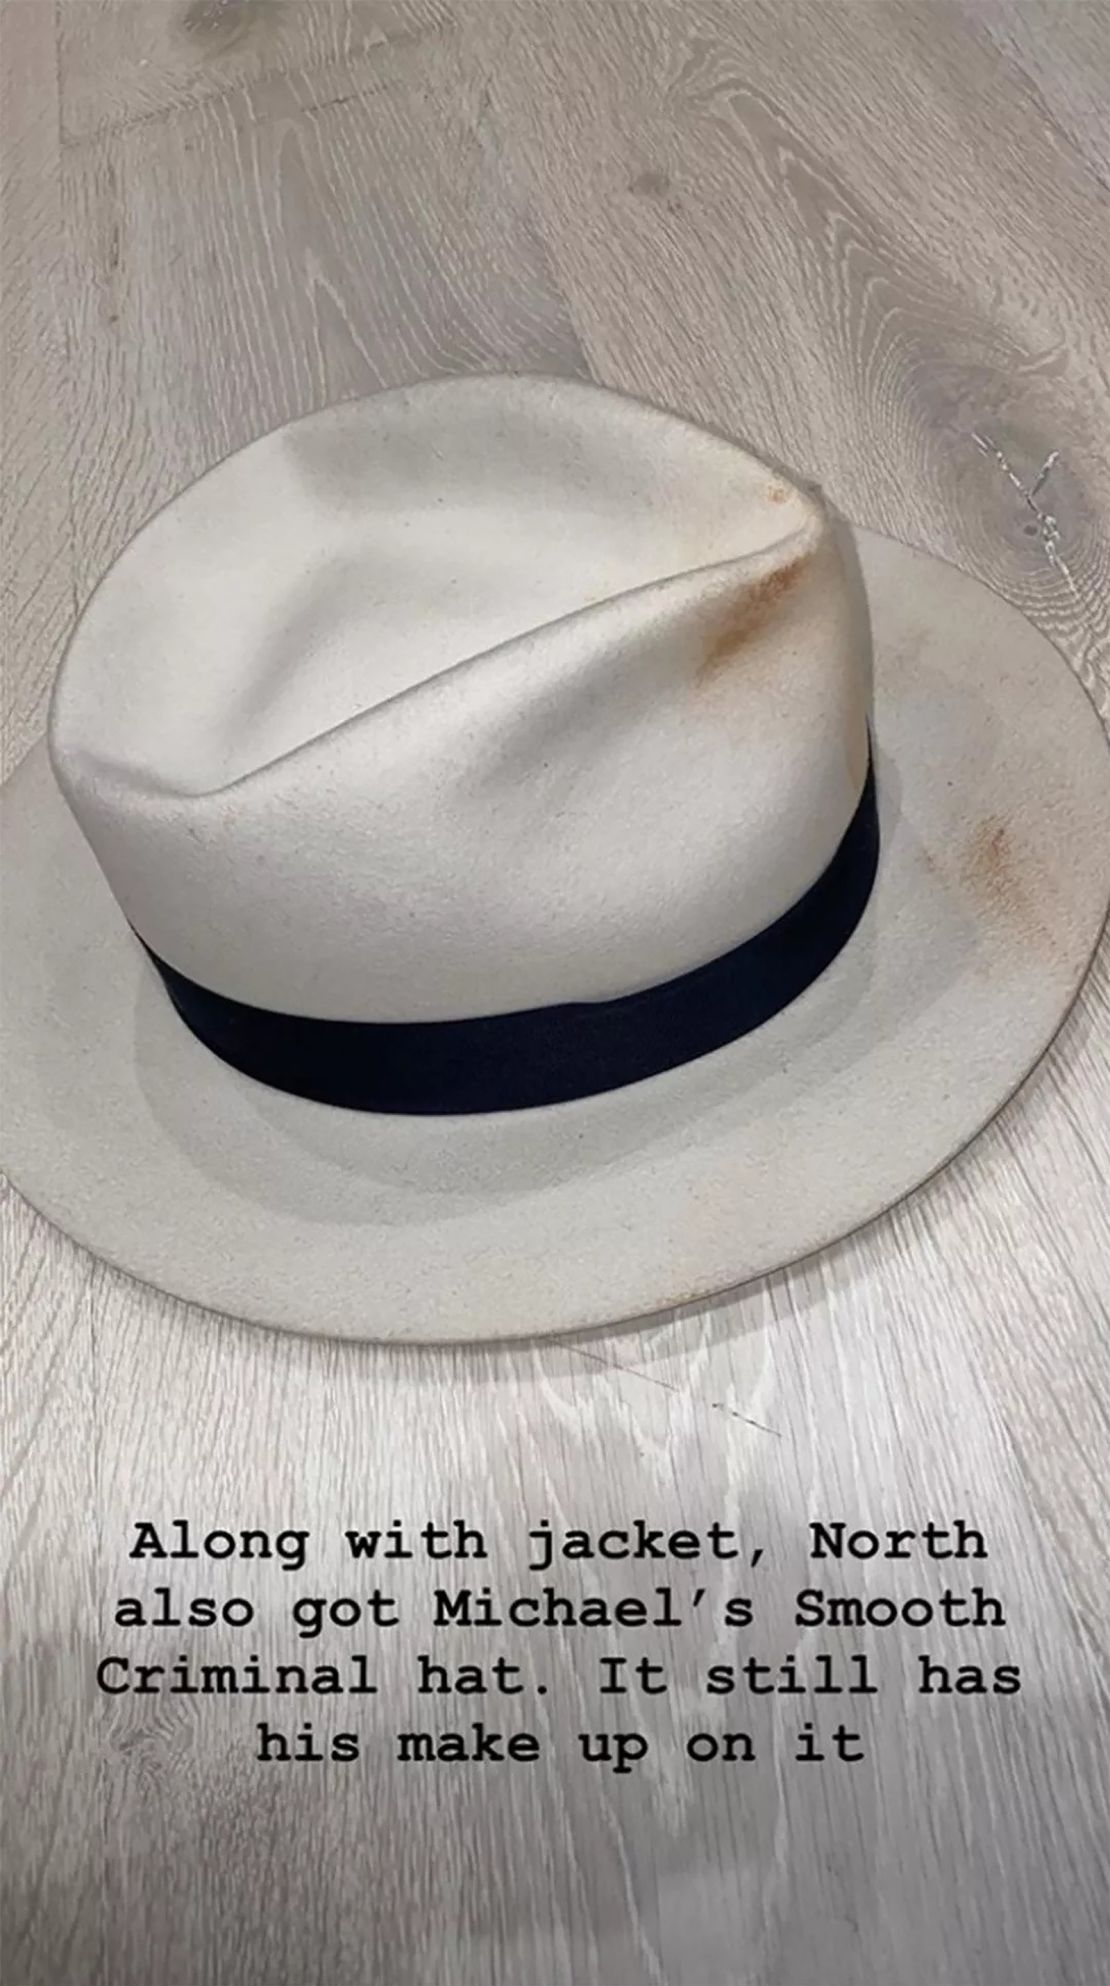 In 2019 after winning the auction, Kim Kardashian posted an Instagram story of the "Smooth Criminal" hat, noting how excited North West was.